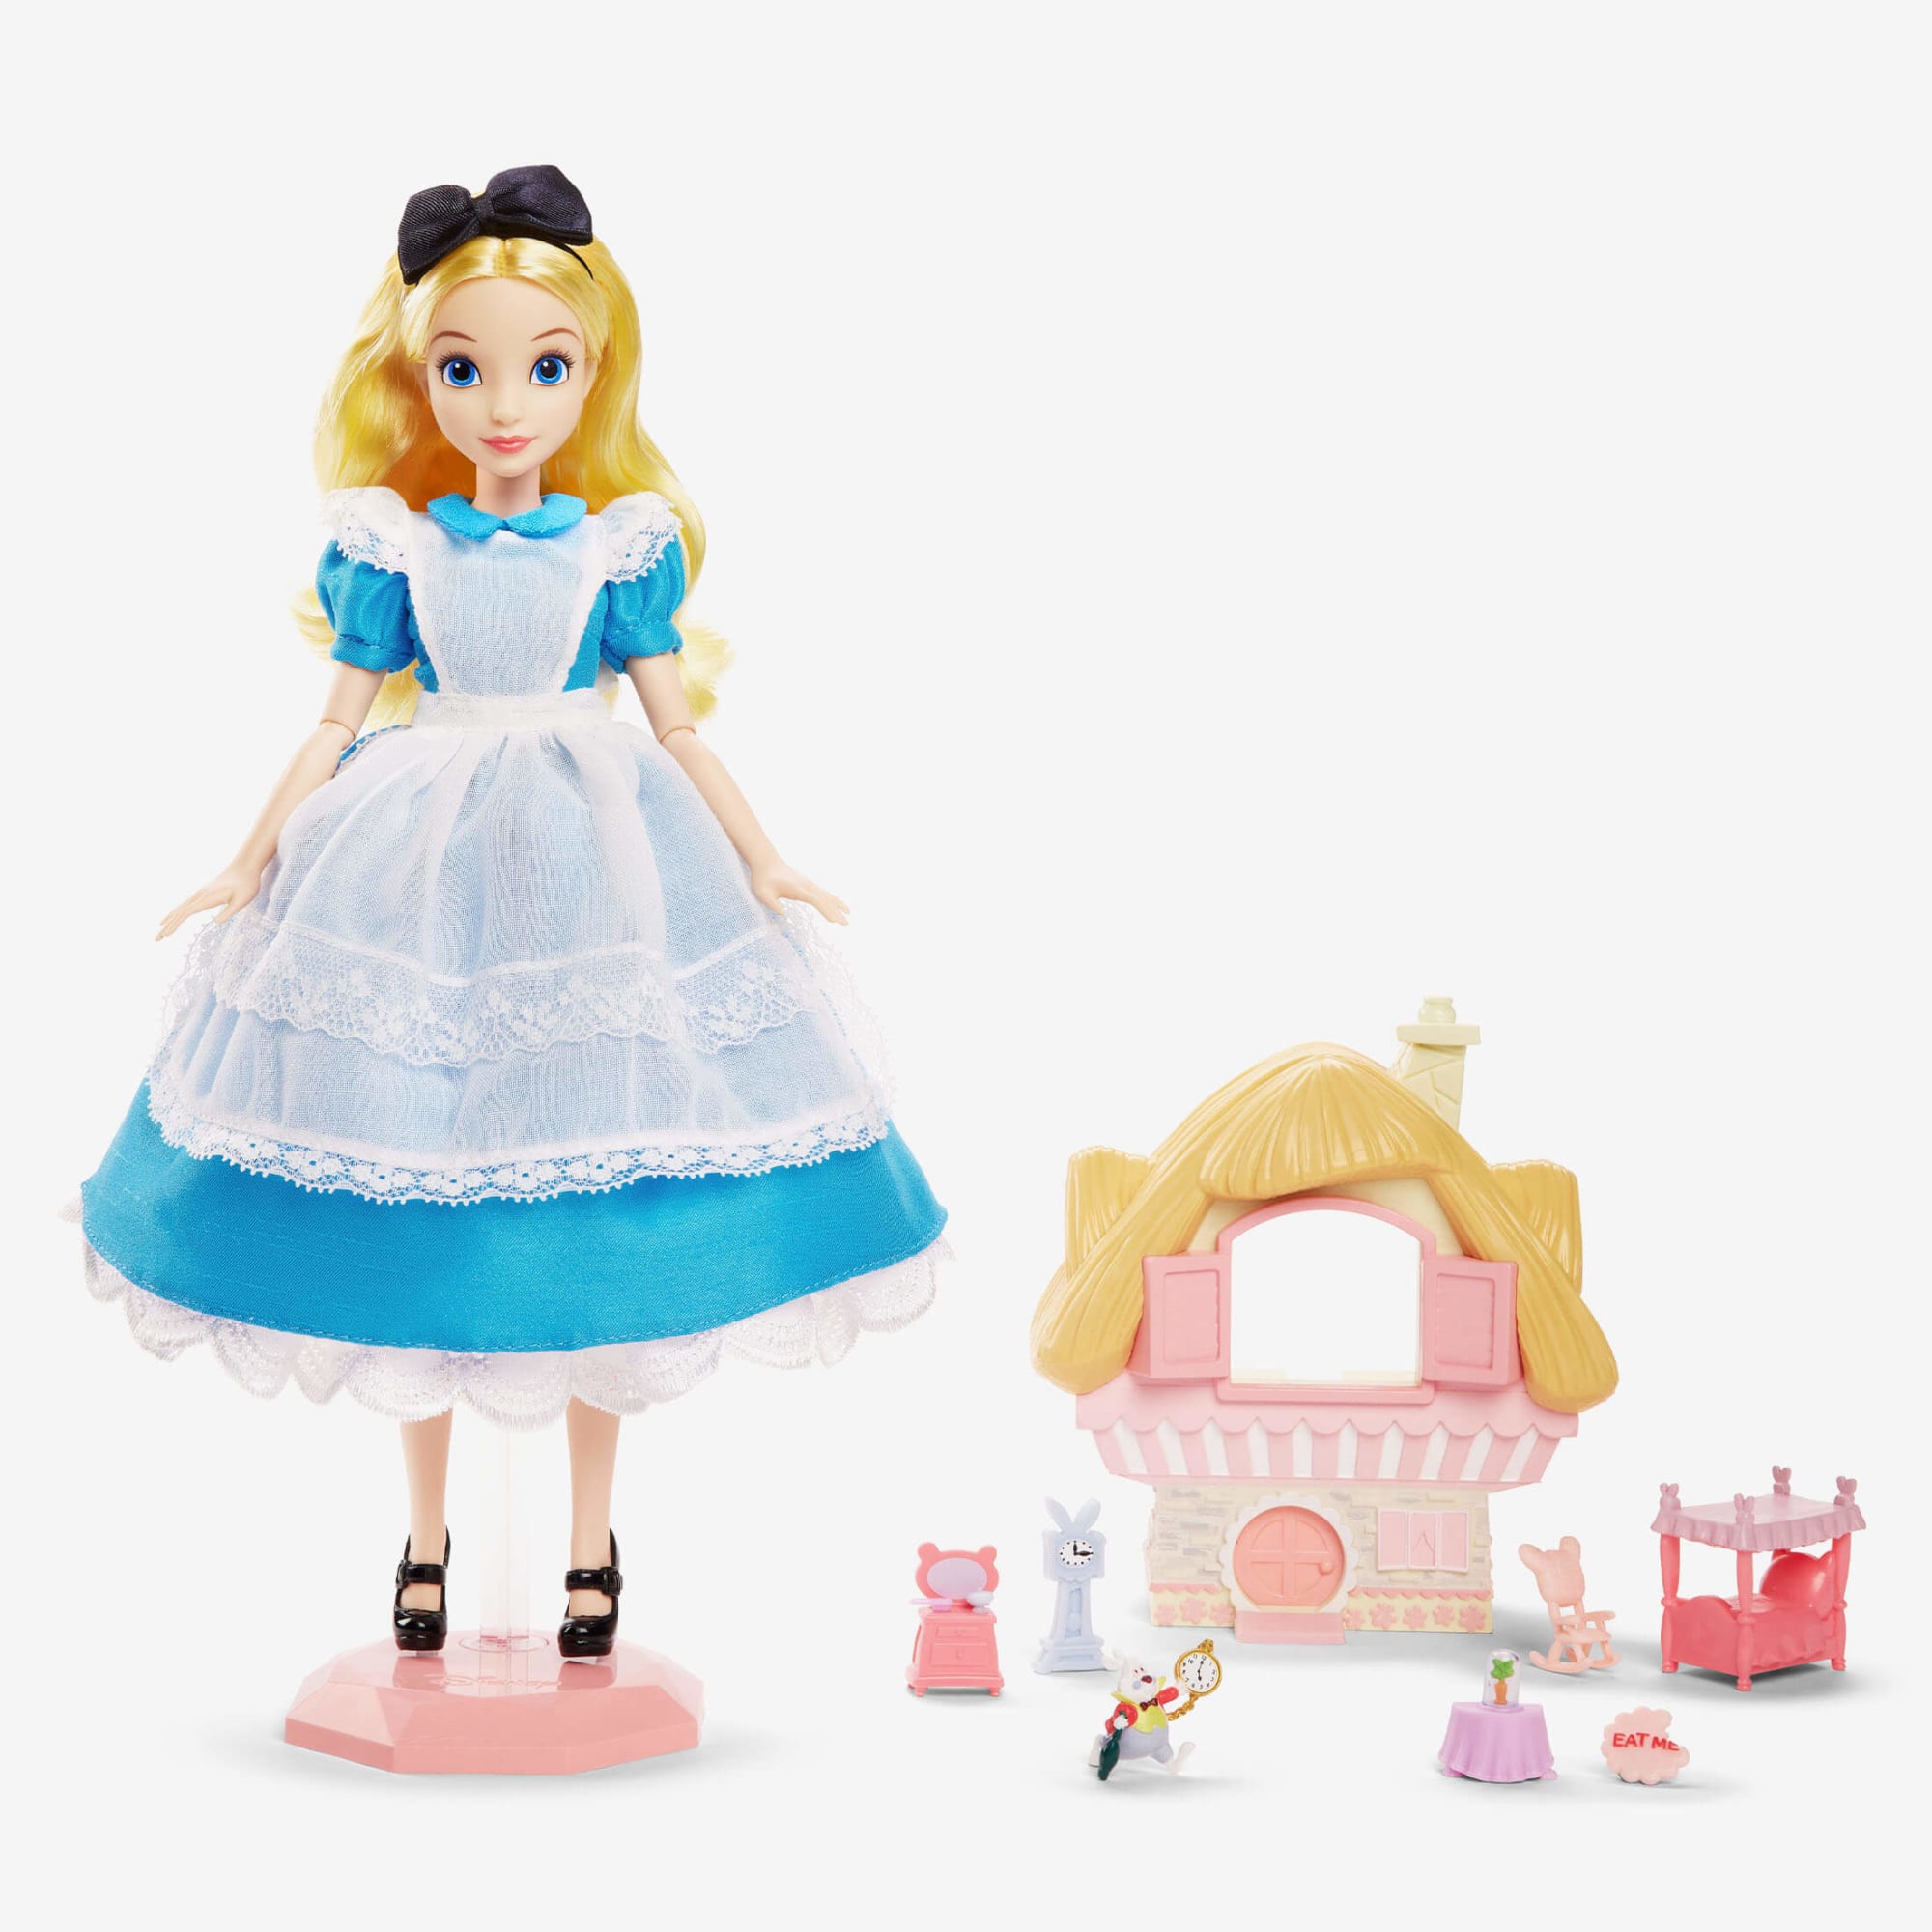 My Favorite Fairy Tale Collection Dolls Alice In Wonderland And